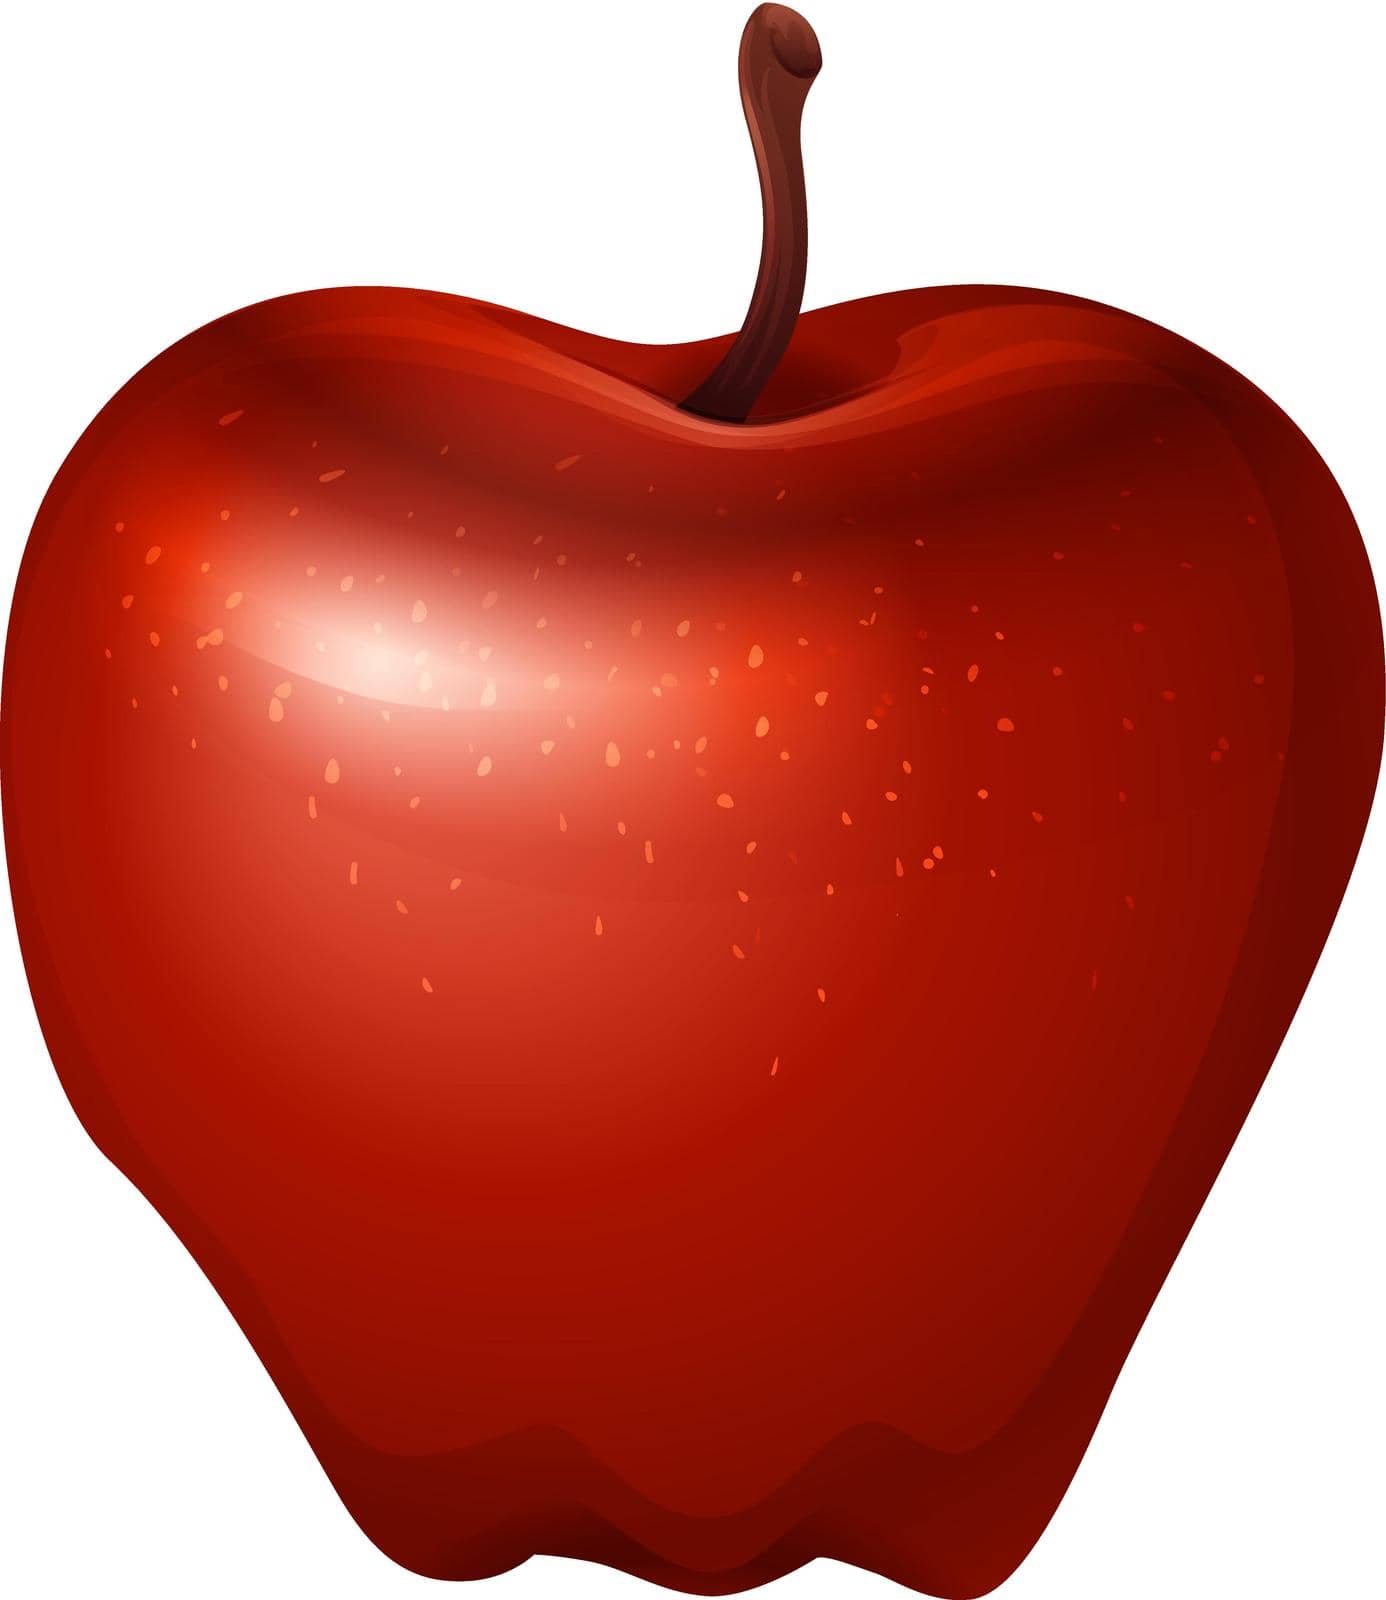 Illustration of a red crunchy apple on a white background